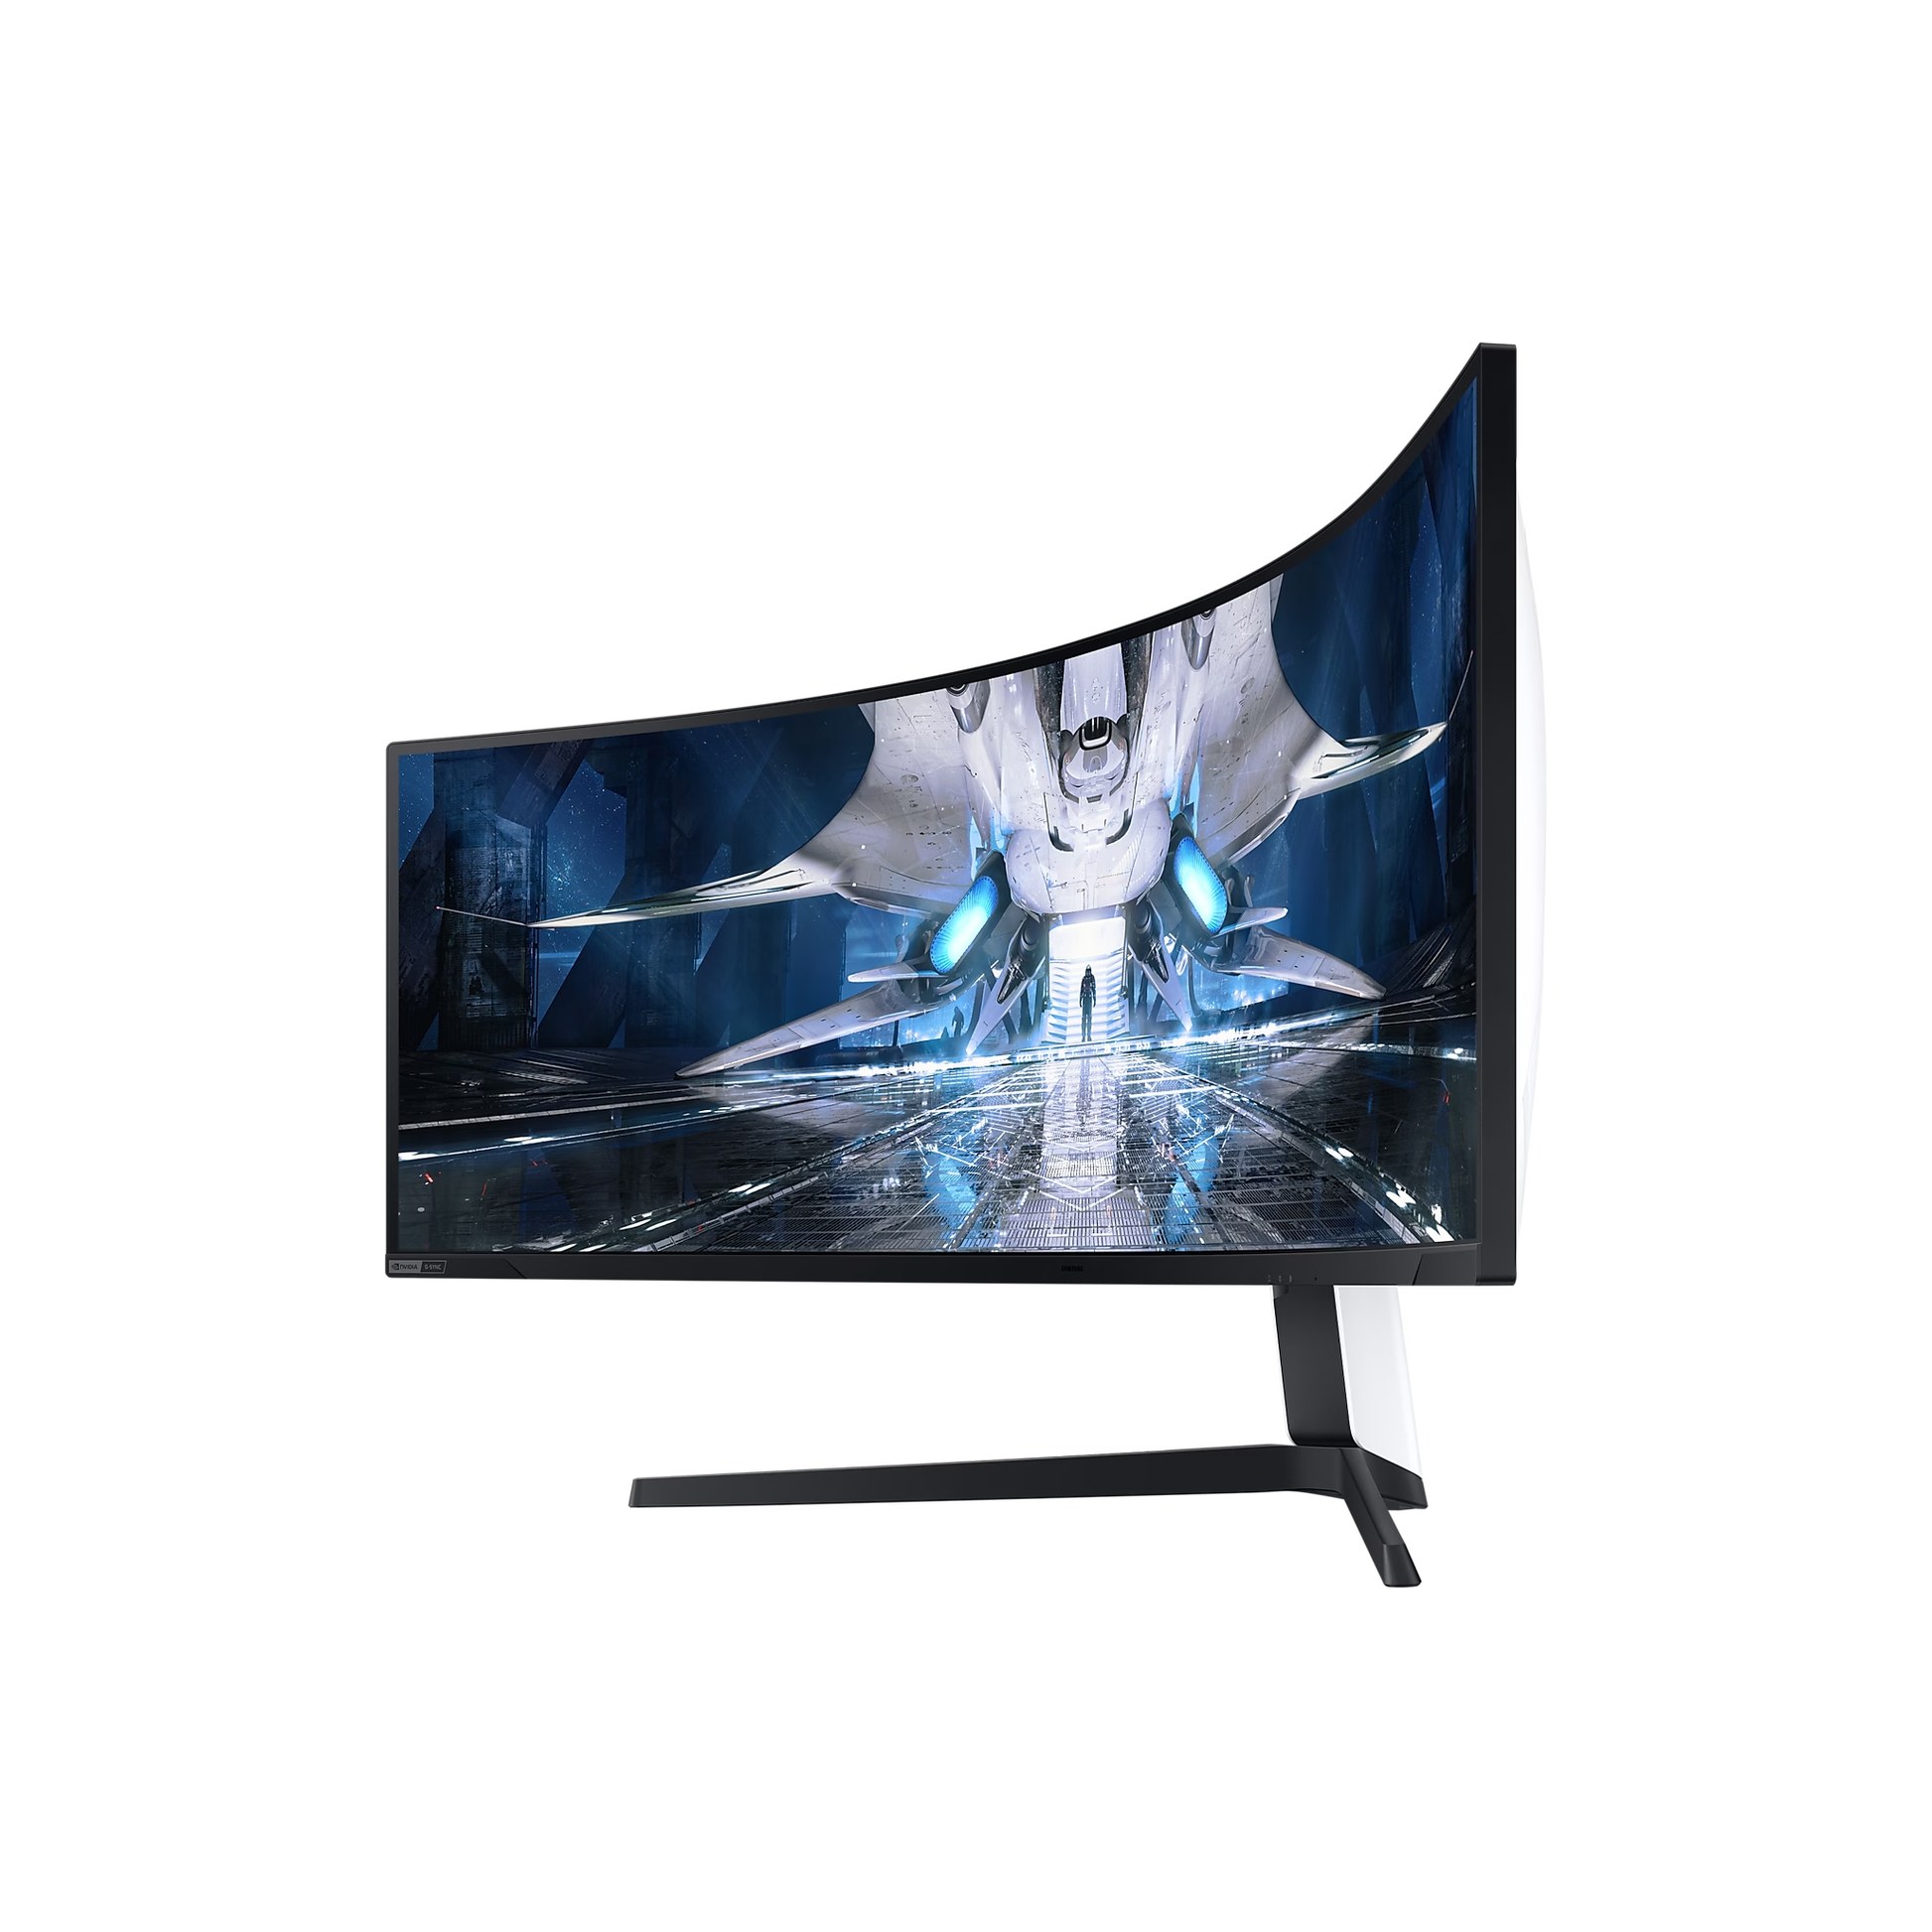 Samsung Odyssey Neo G9 49-inch Curved Gaming Monitor